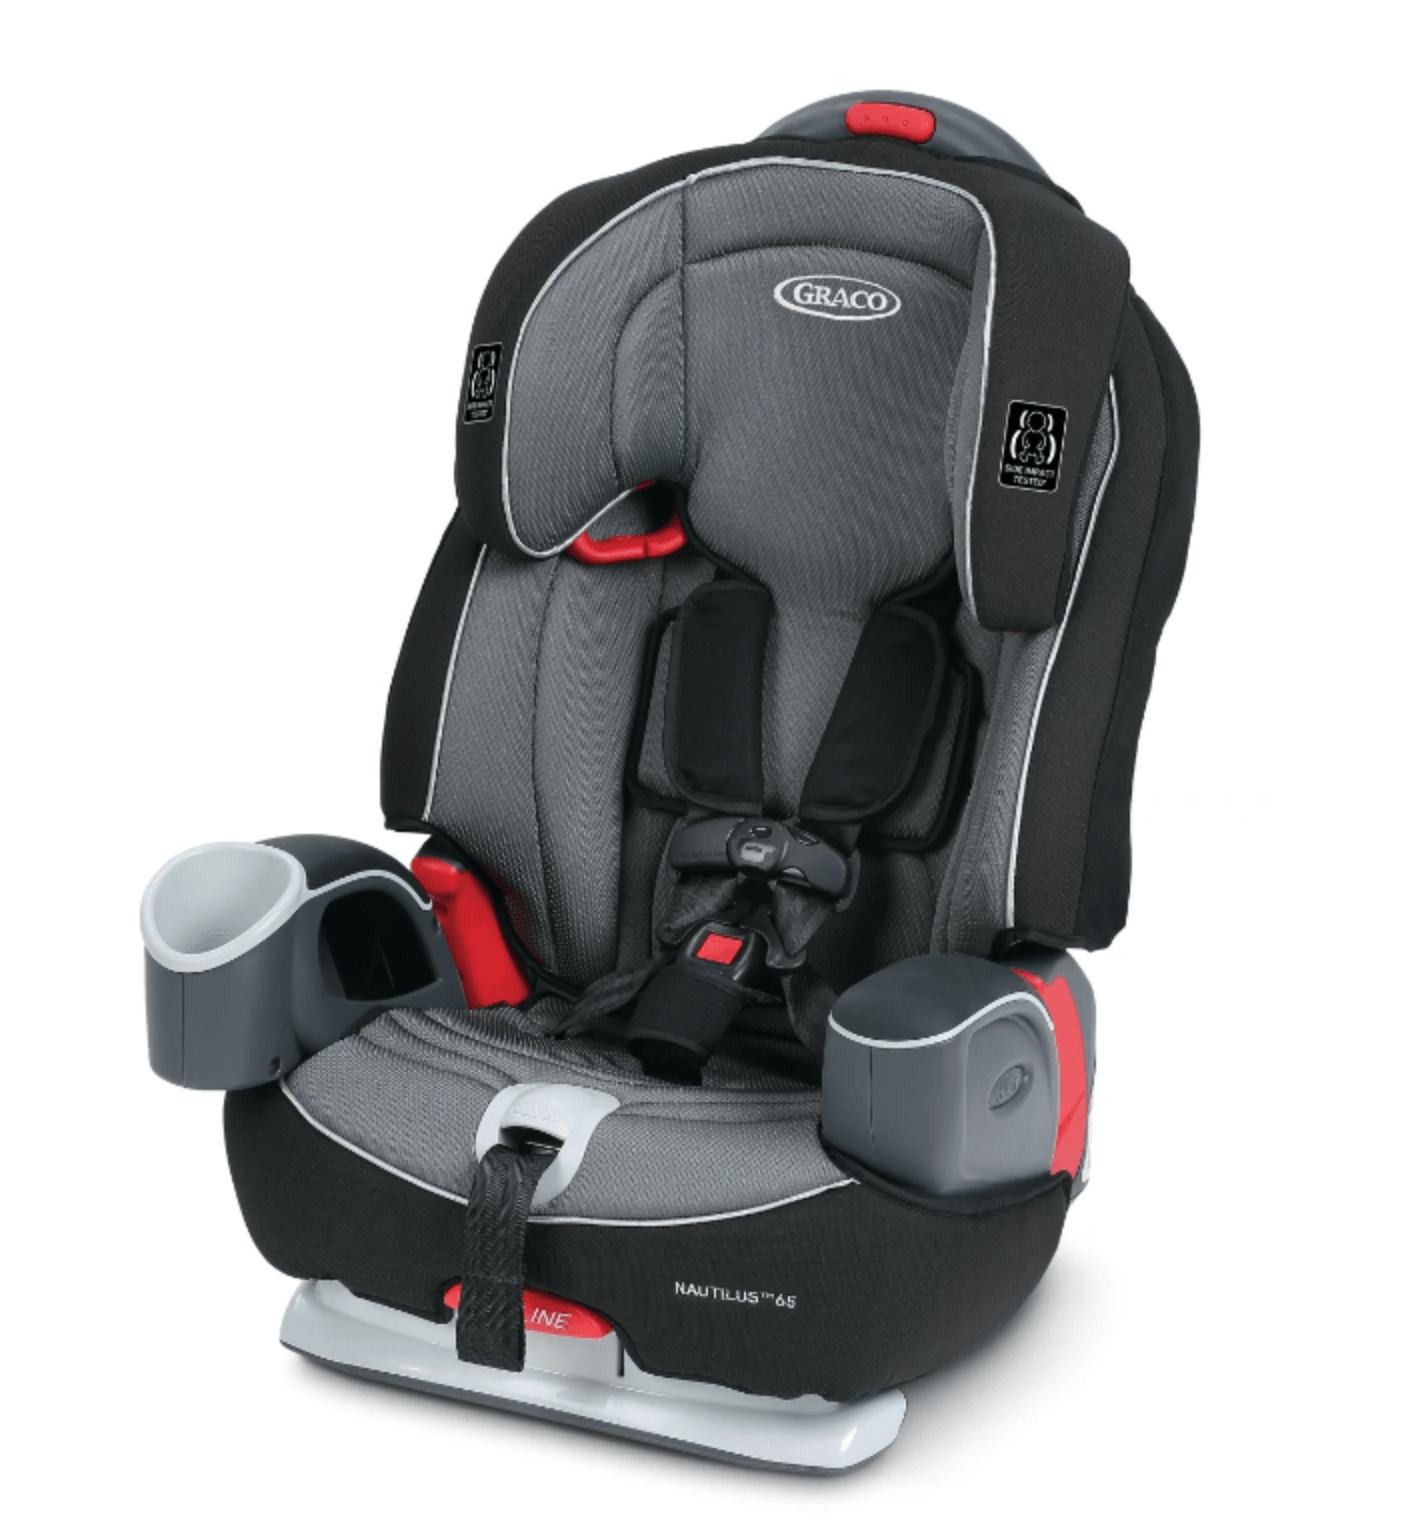 Nautilus® 65 3-in-1 Harness Booster Car Seat - The Baby's Room